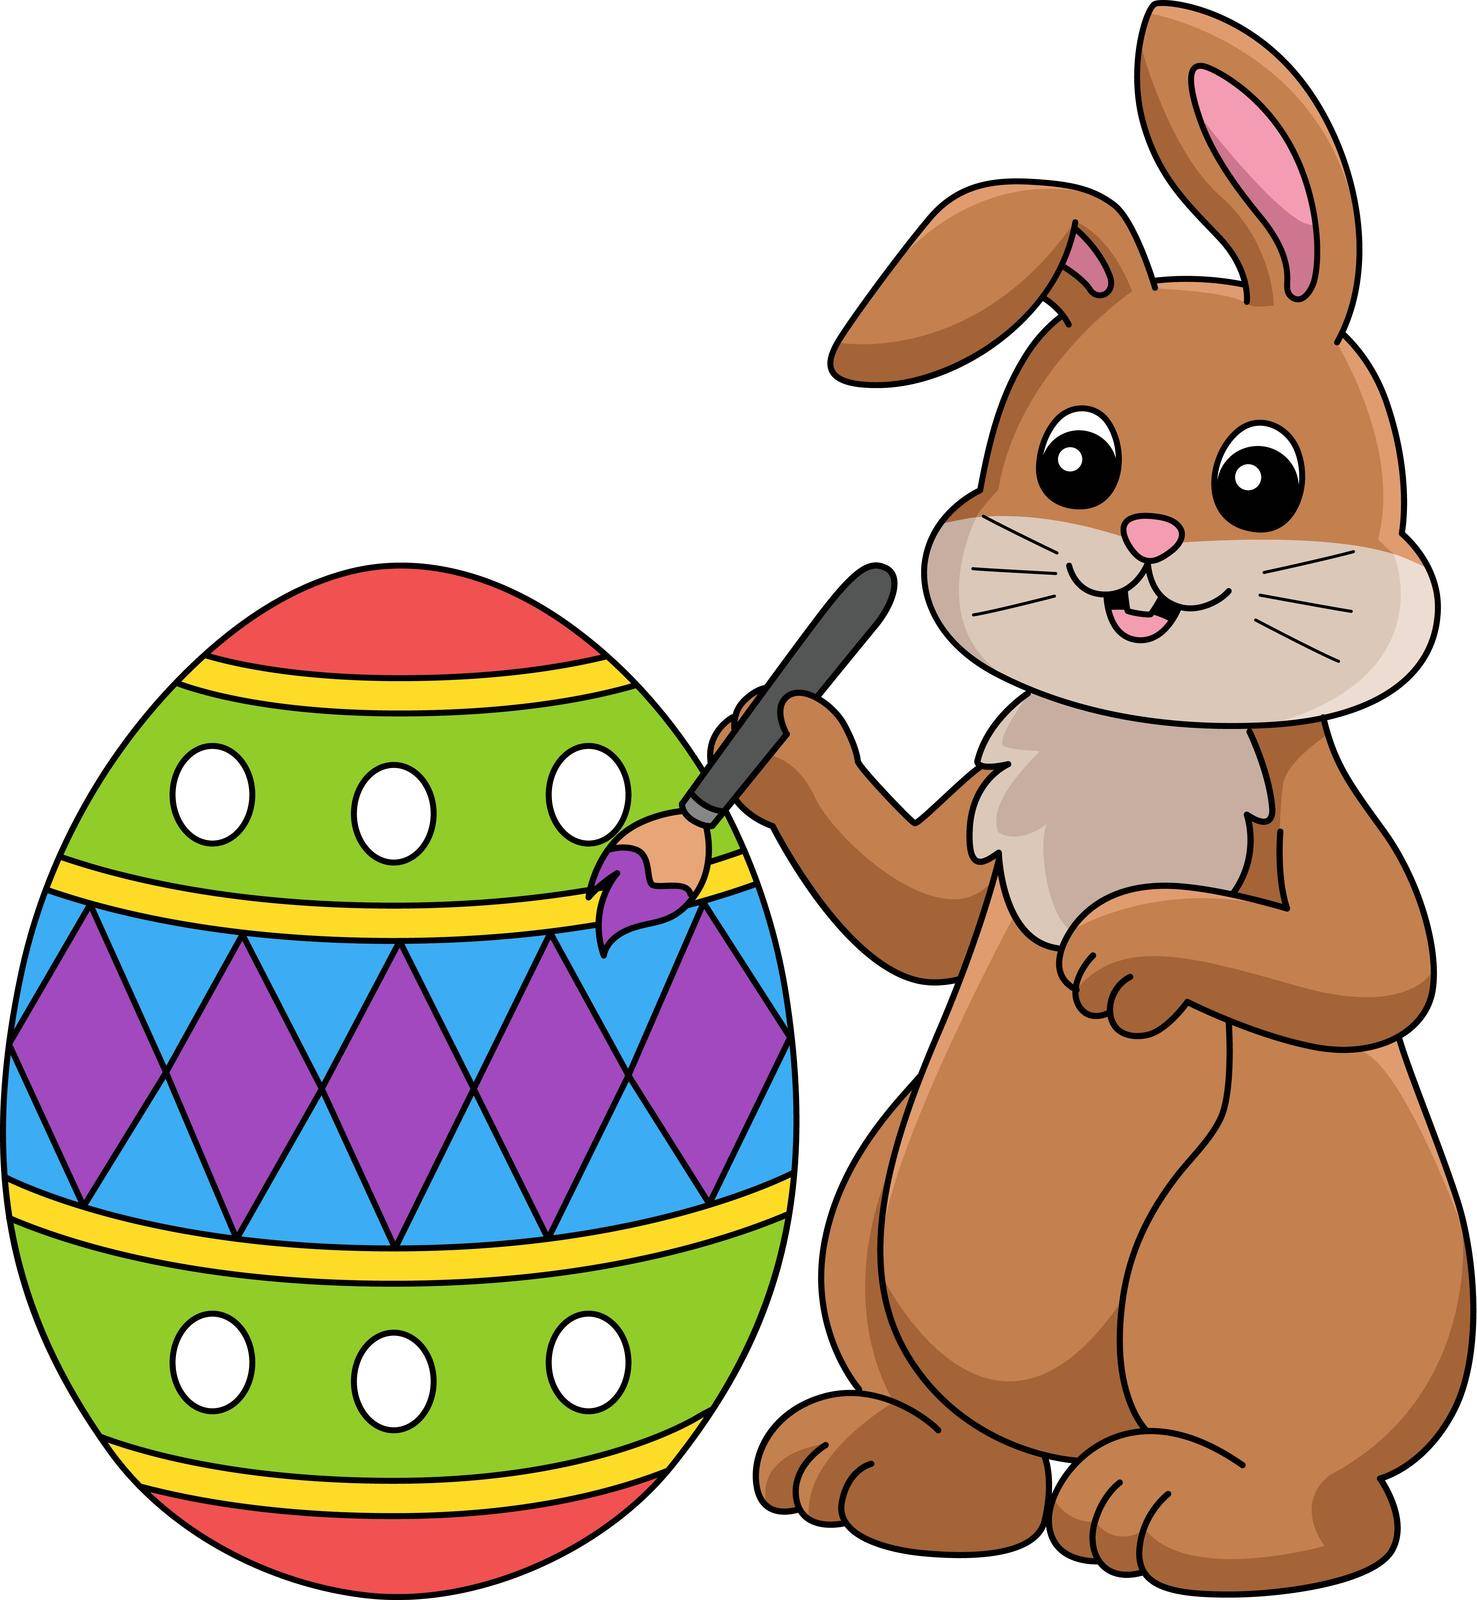 This cartoon clipart shows a rabbit painting easter egg illustration.